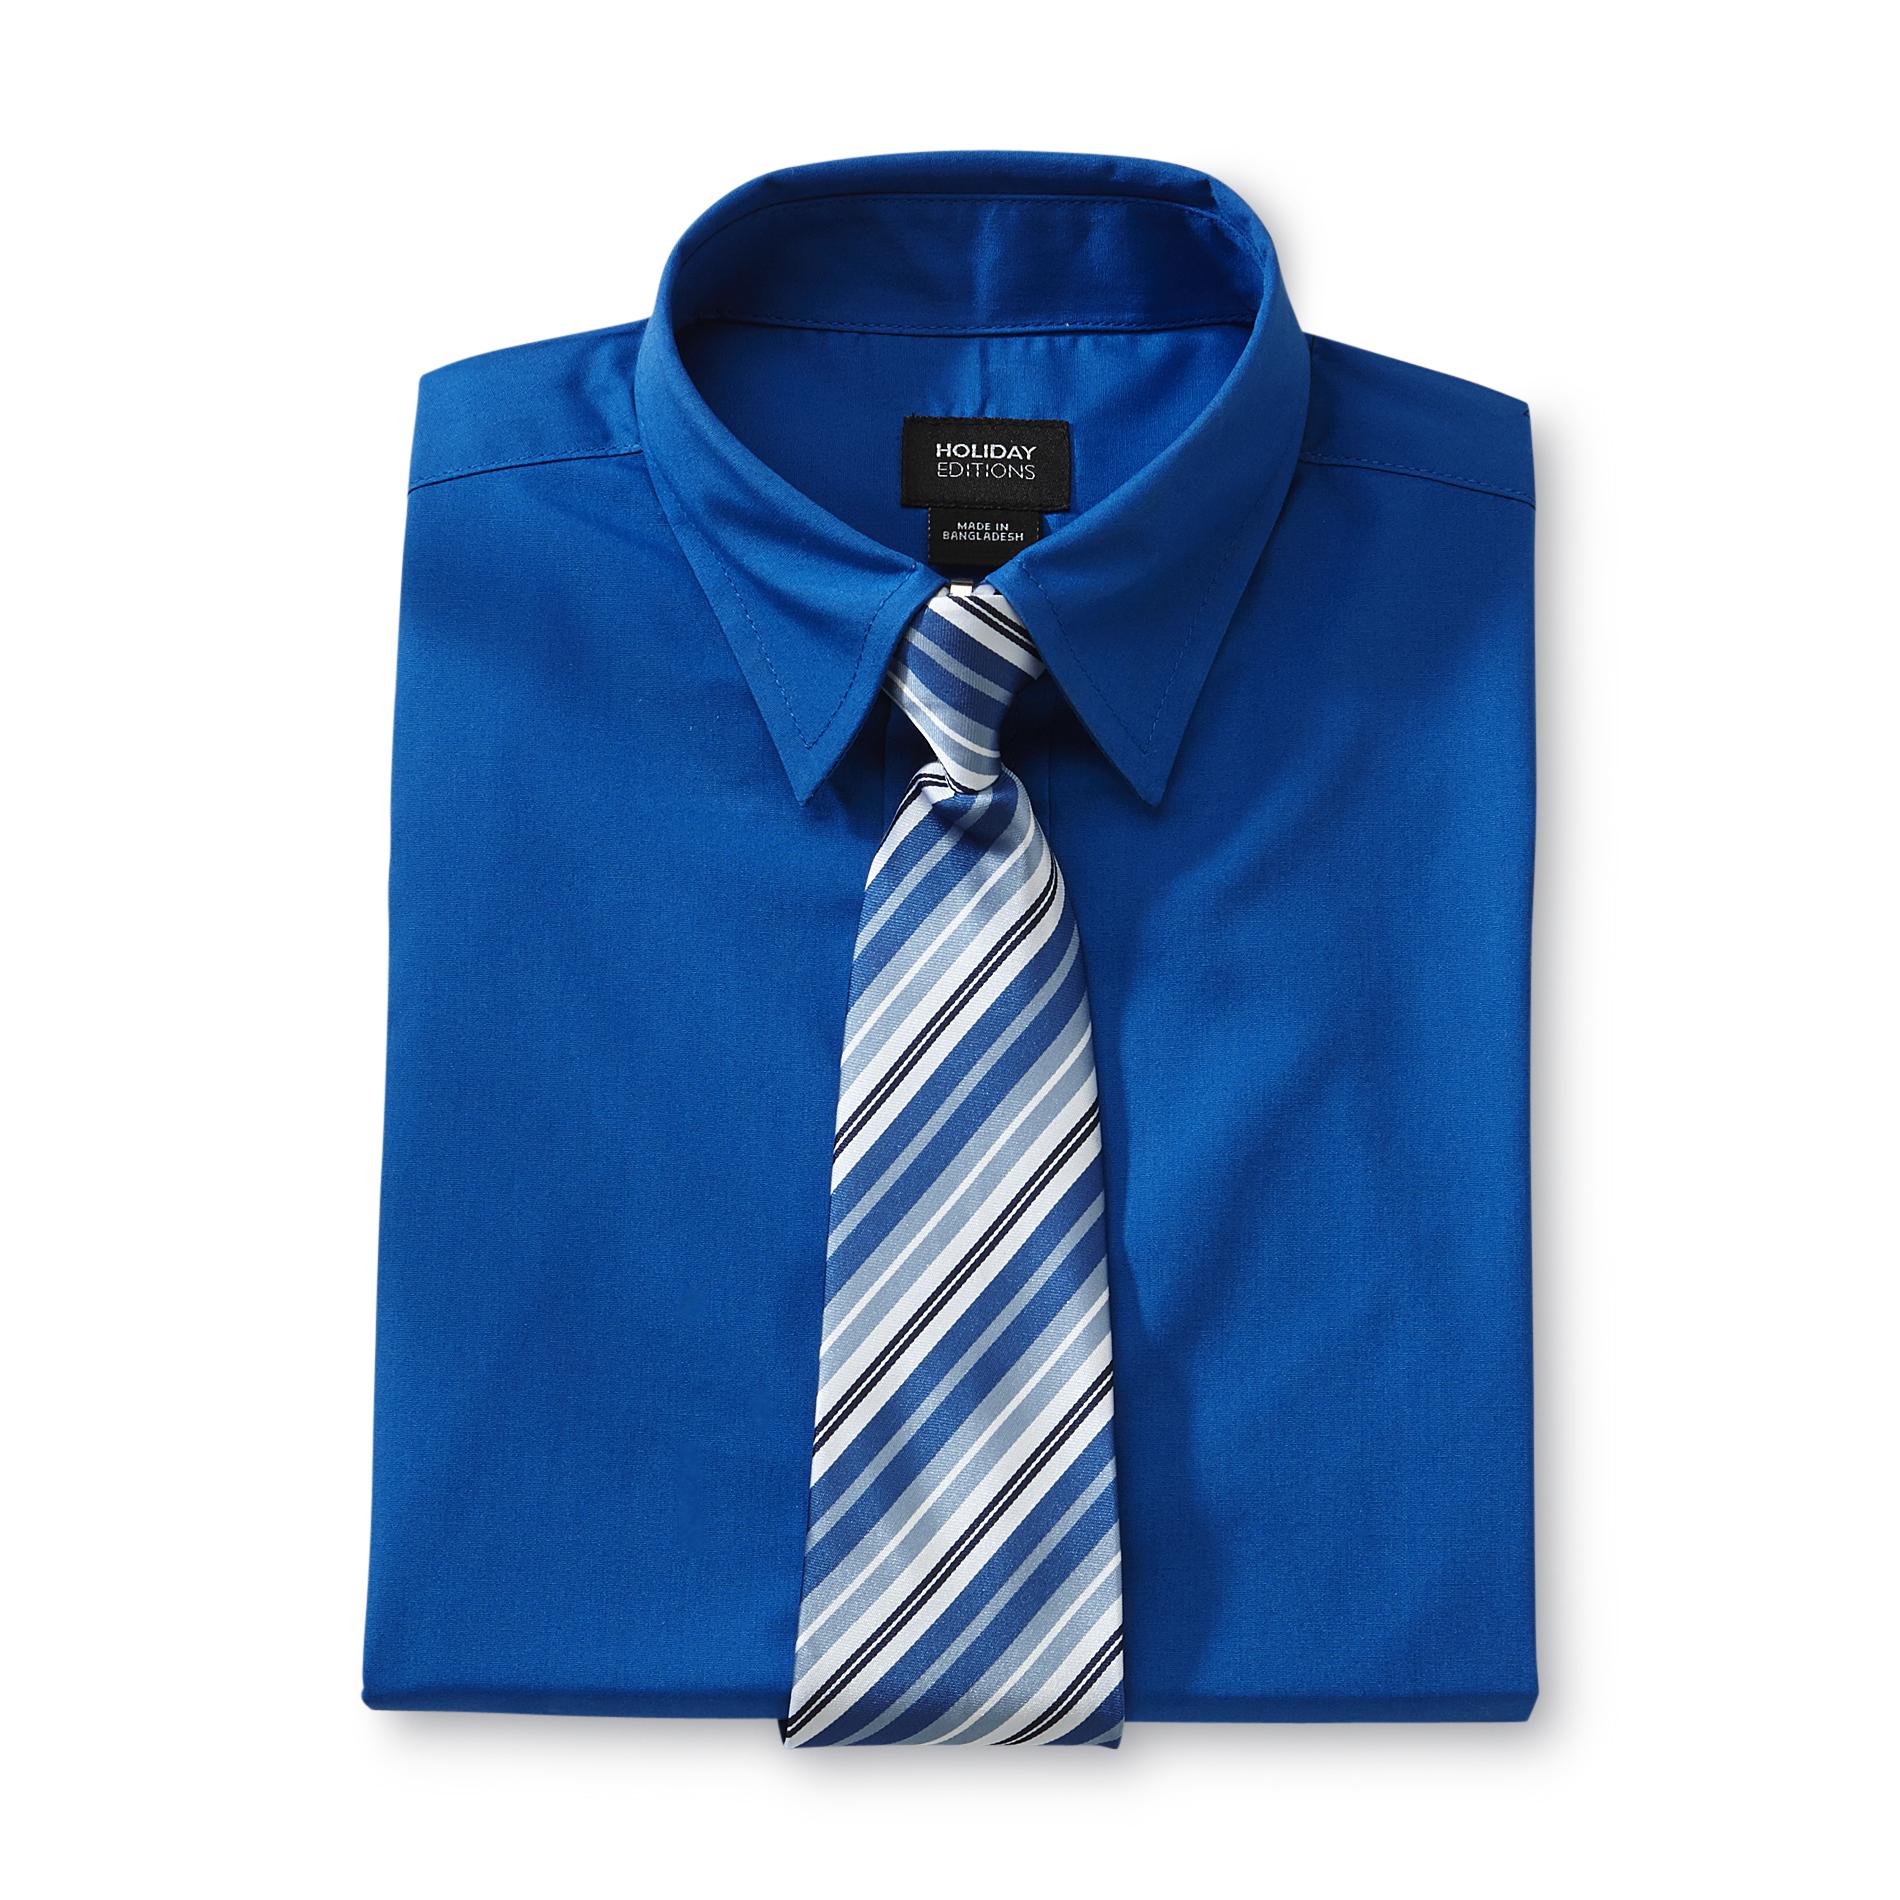 Holiday Editions Boy's Dress Shirt & Tie - Striped